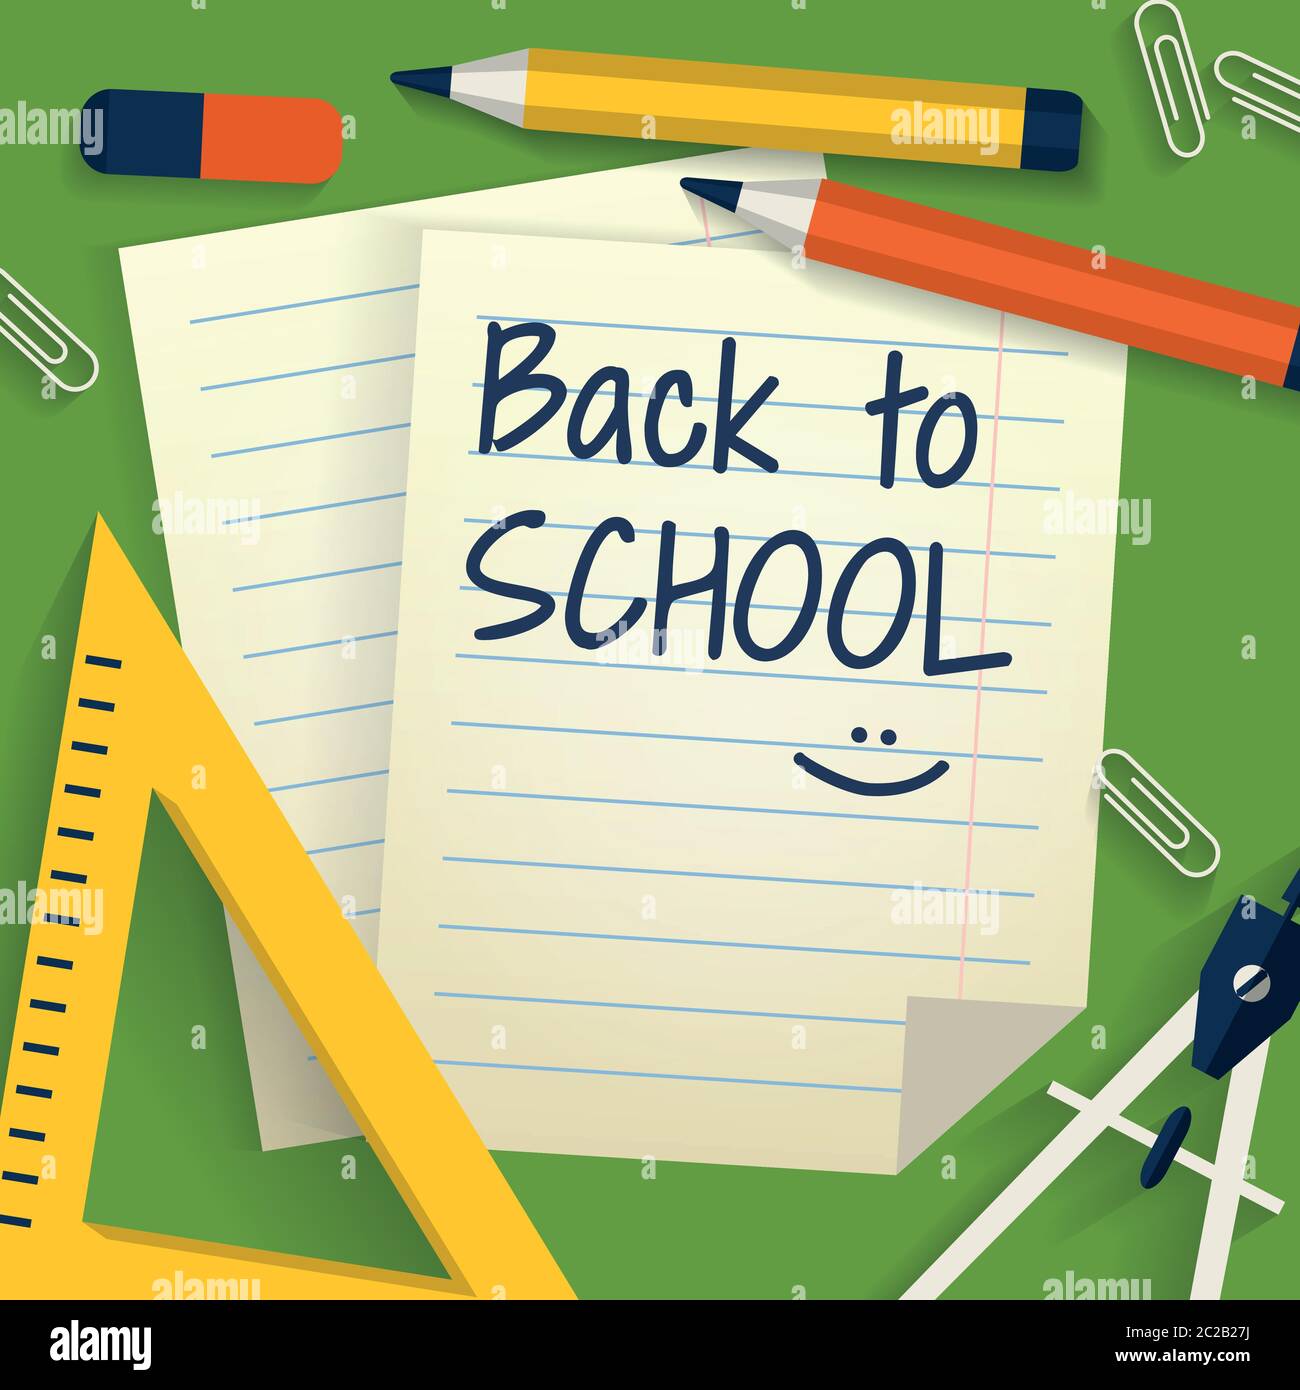 Back to school. Background with stationery, lined sheets of paper and place for text. Flat design. Vector illustration. Stock Vector